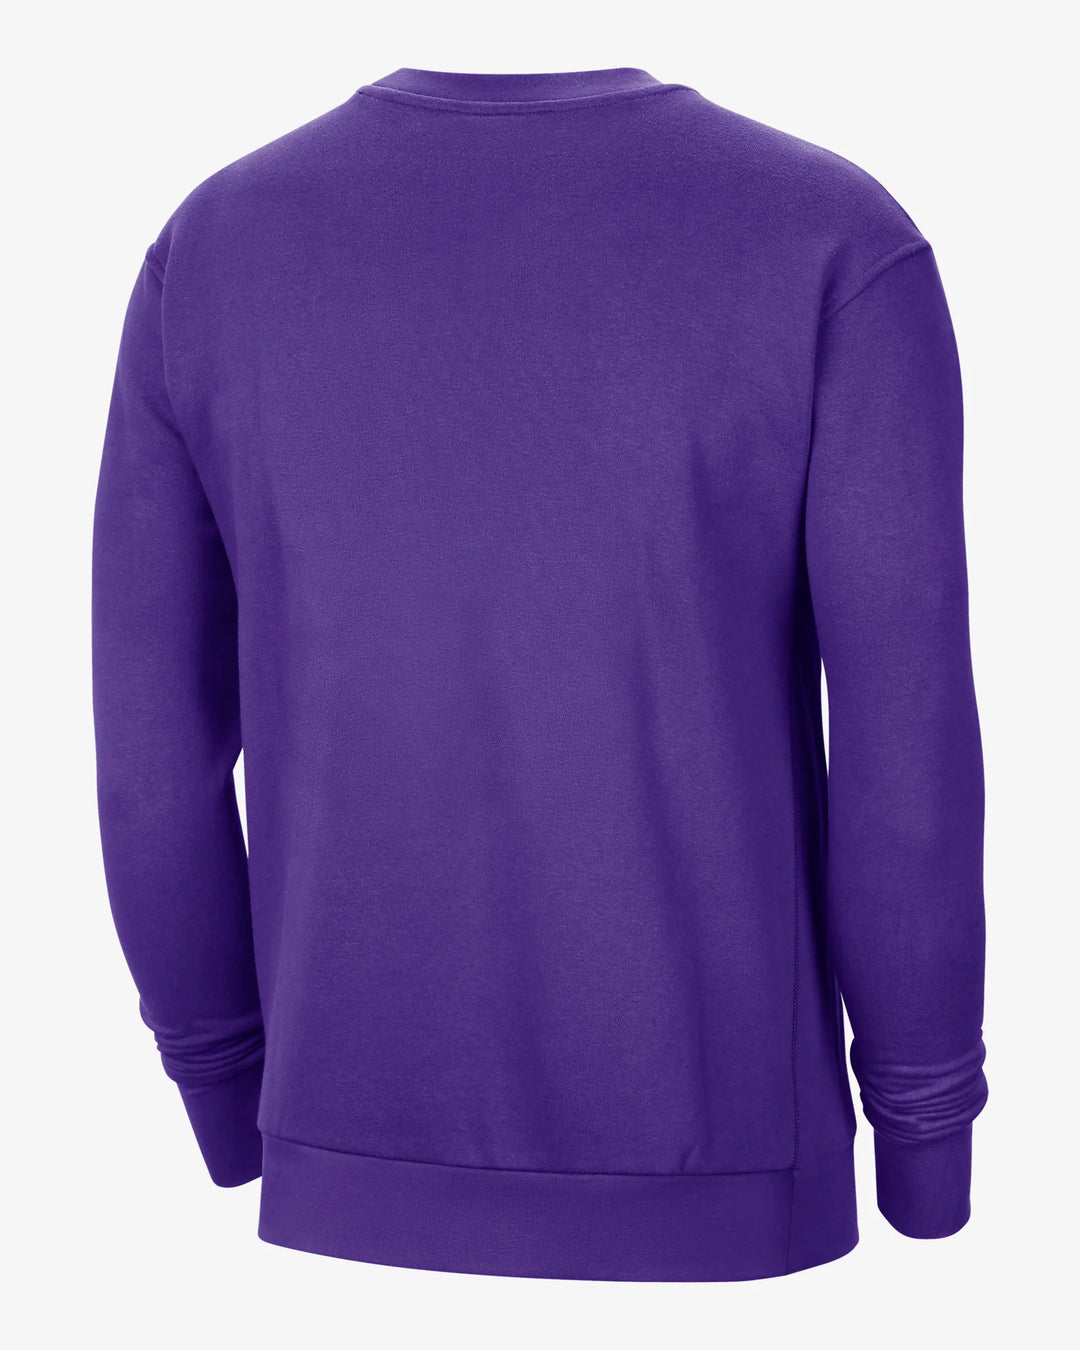 Los Angeles Lakers Courtside Fleece Pullover